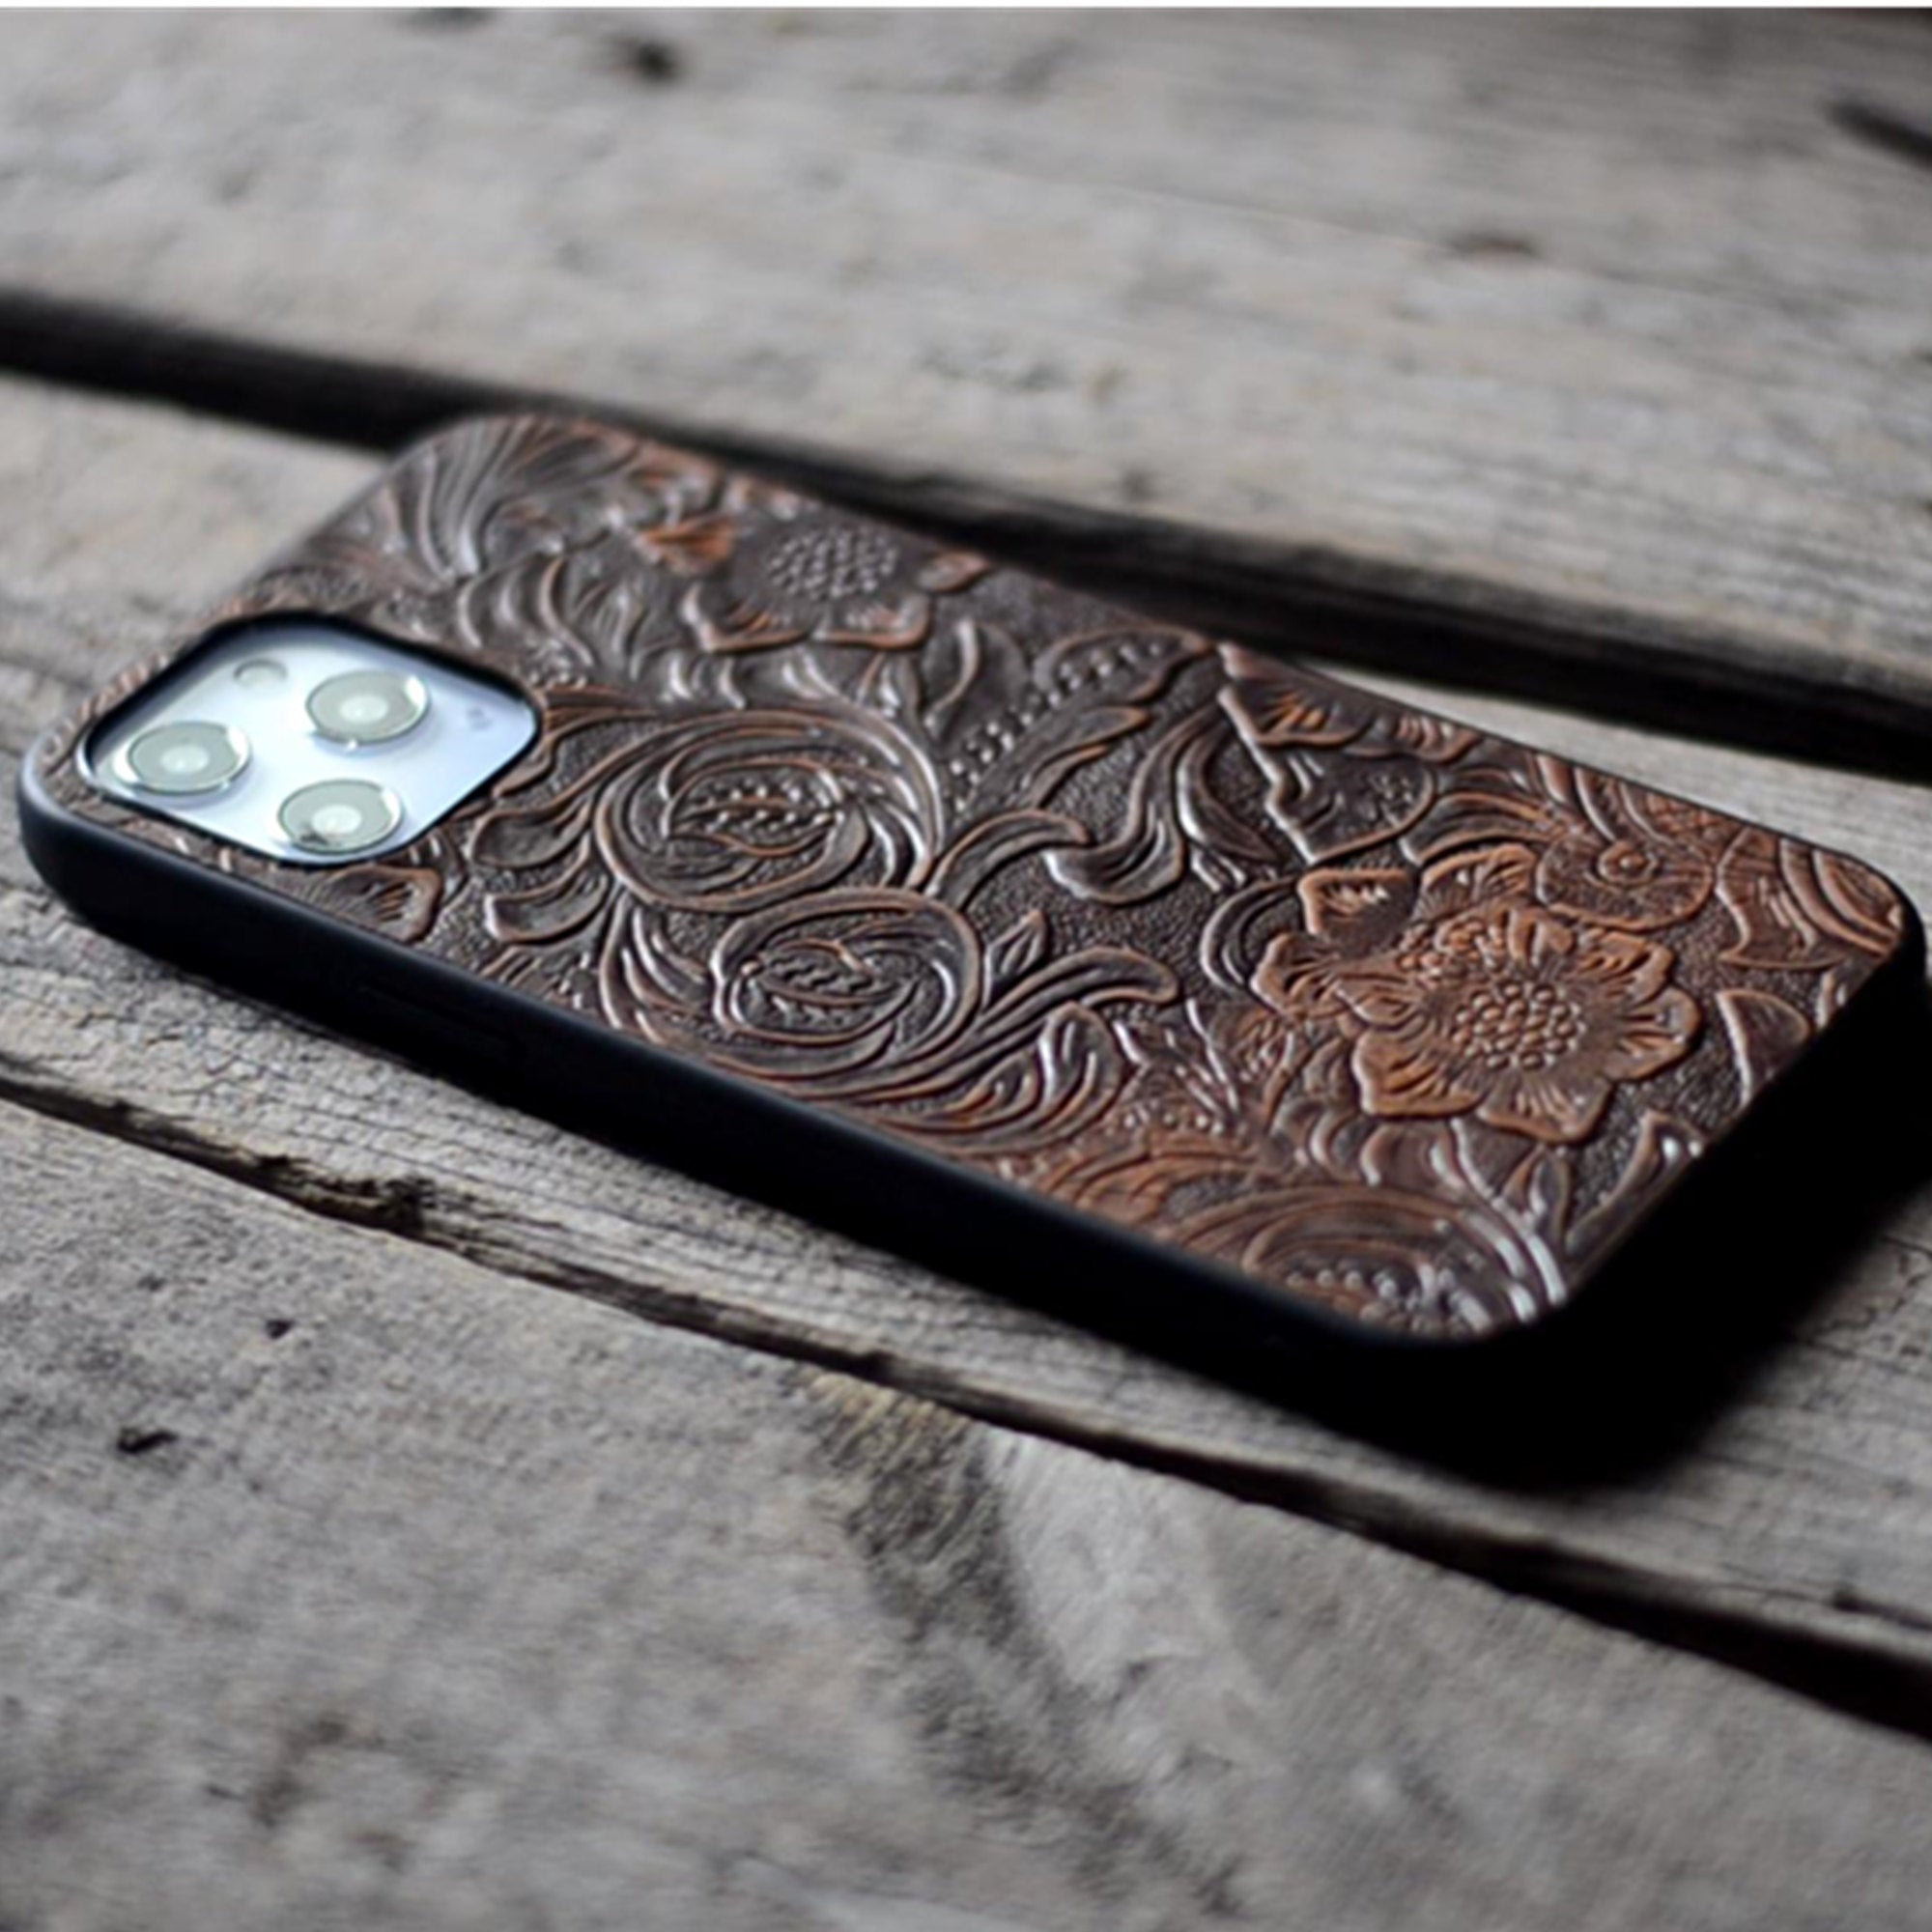 Leather iPhone case / cover - iPhone 12 & 11 ( Pro / Max / Mini